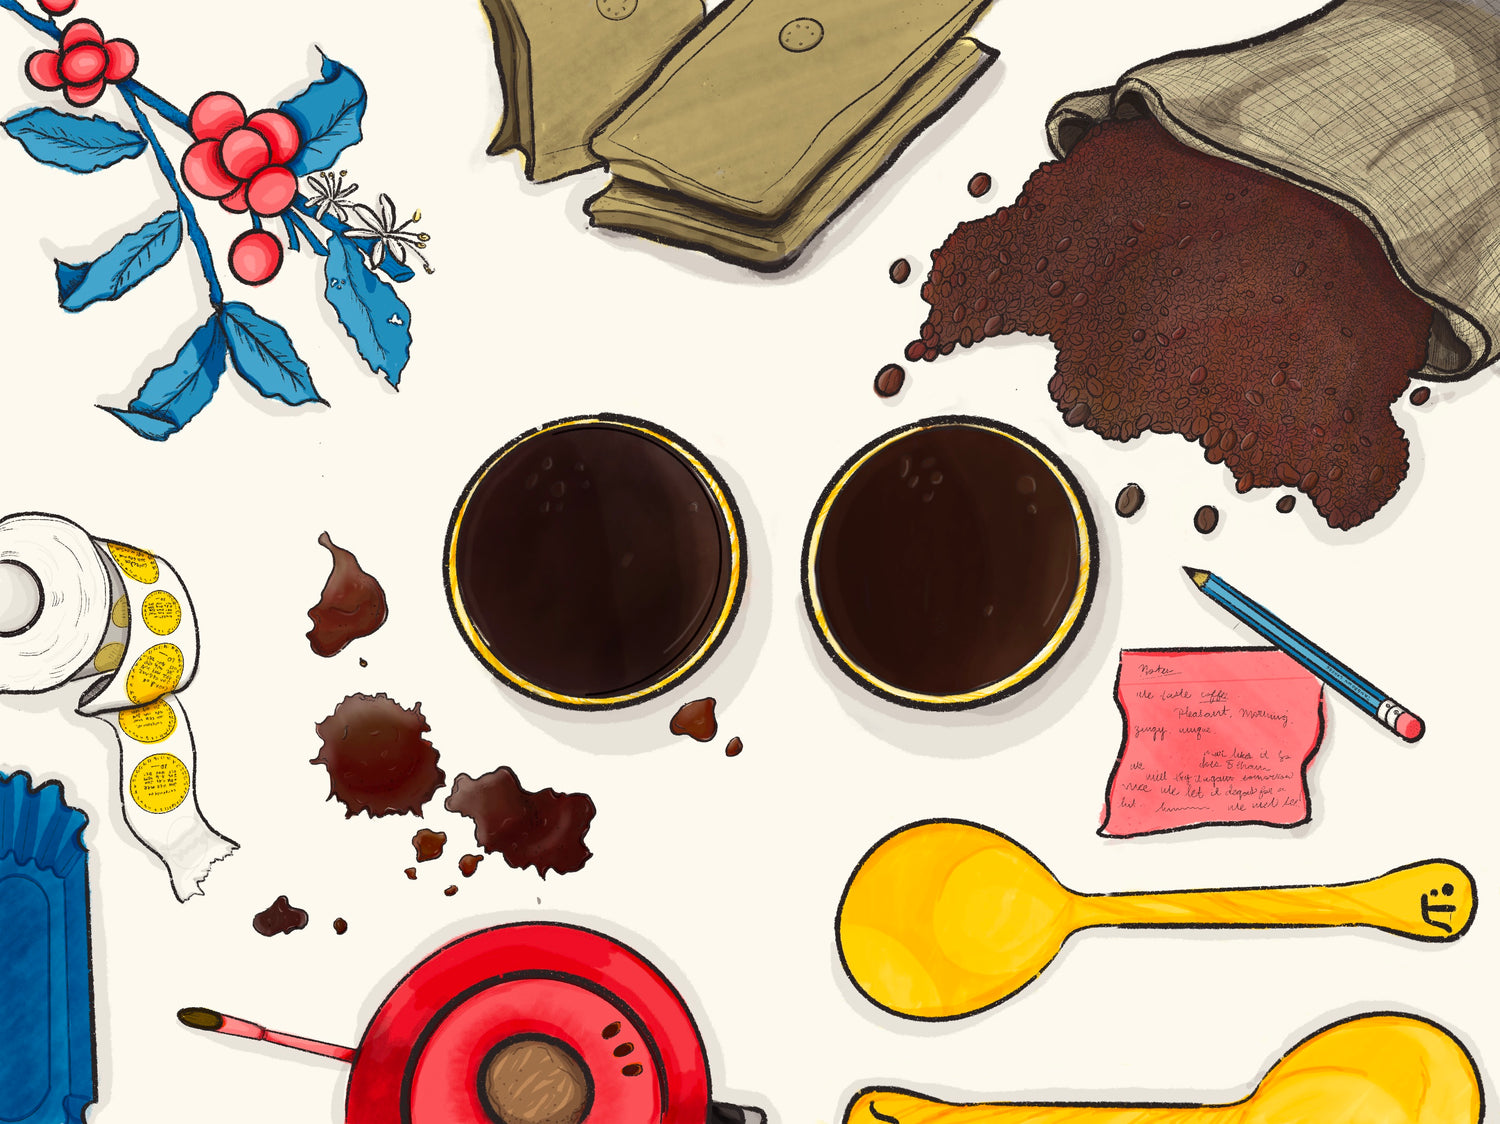 Illustration of coffee supplies including plant, bags, cupping spoon, coffee stains, cups, stickers, sorting tray, kettle, and notes all in brand colors